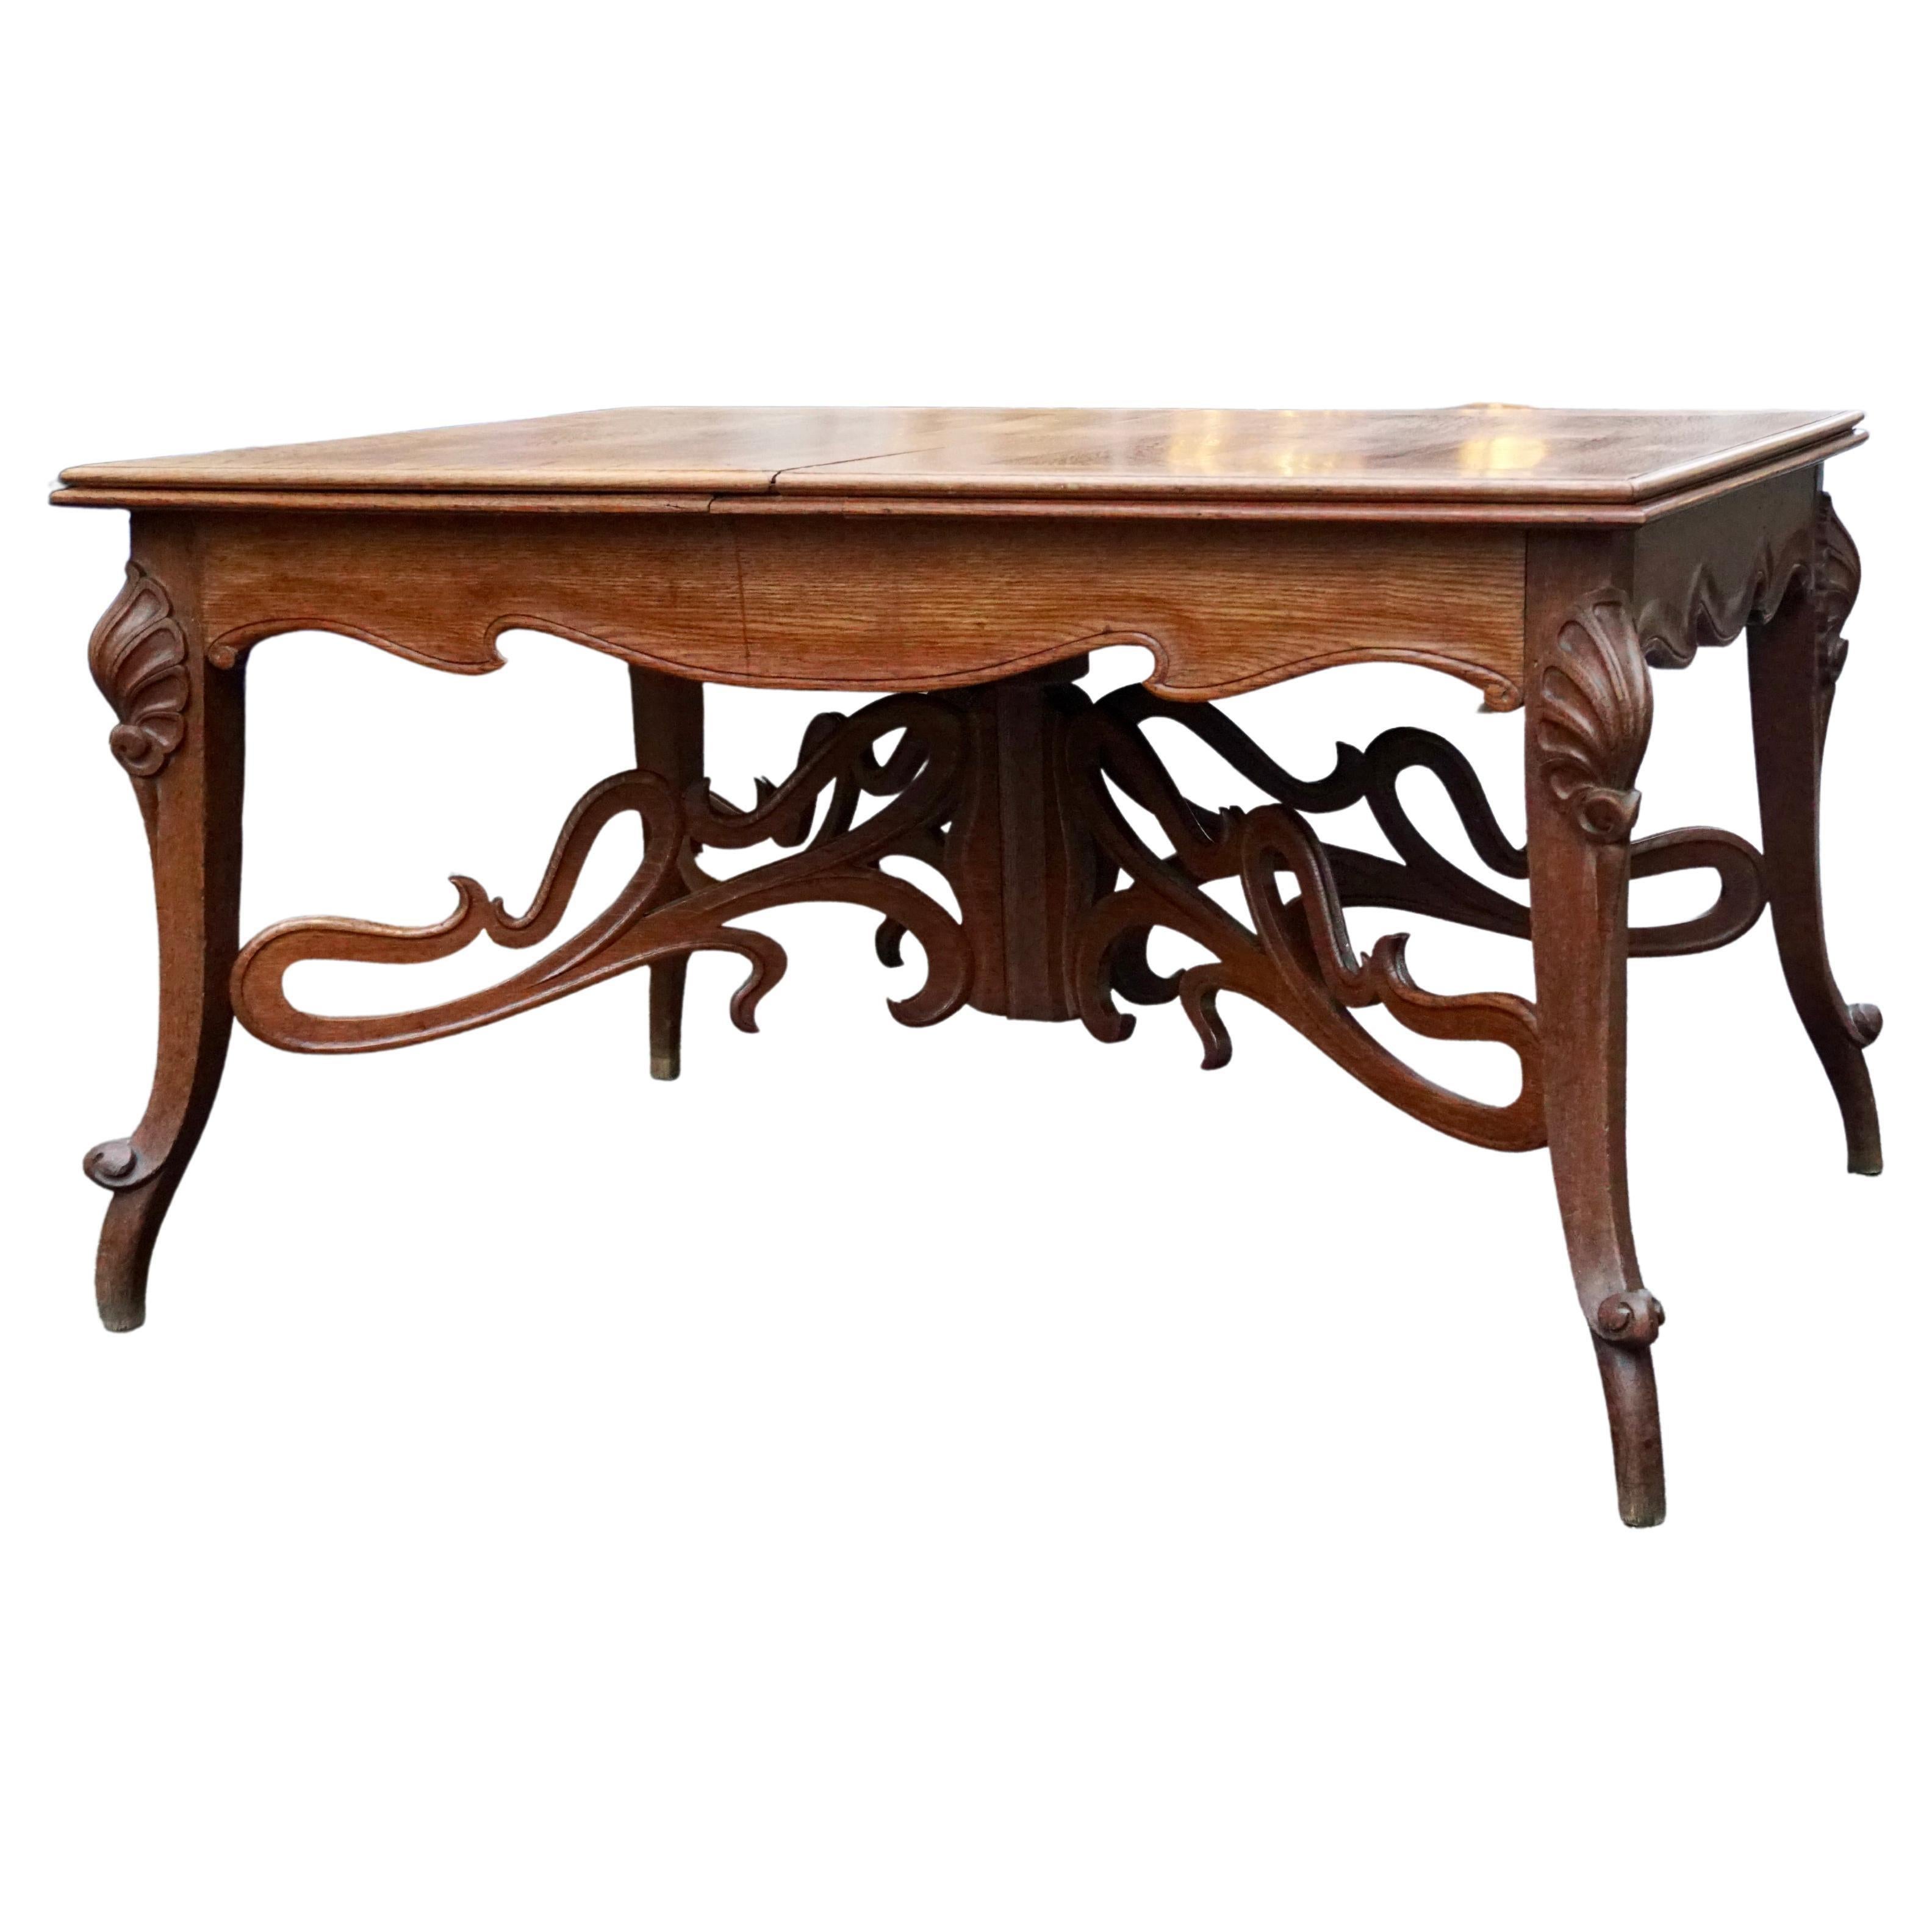 An Art Nouveau period extending dining table, France, circa 1890-1910. (with two conmforming leaves.)

The table can be extended to a length of 89